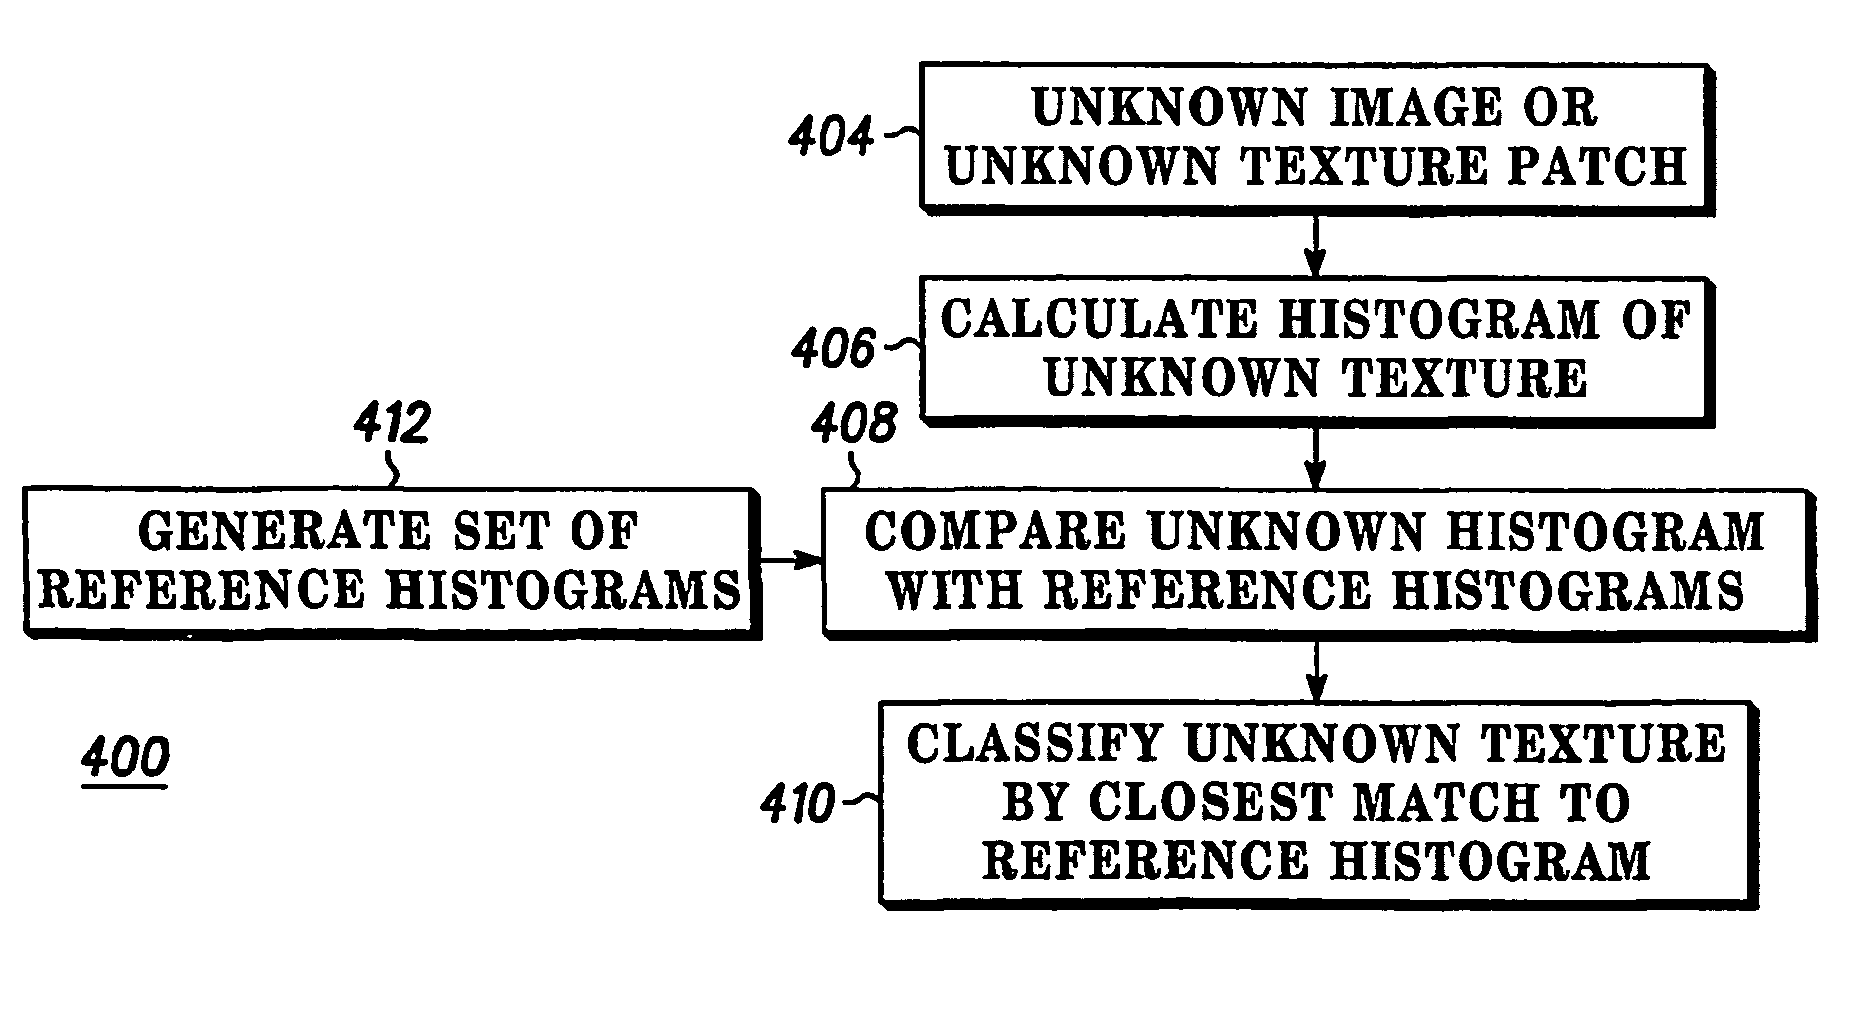 Image transmission system, image transmission unit and method for describing texture or a texture-like region